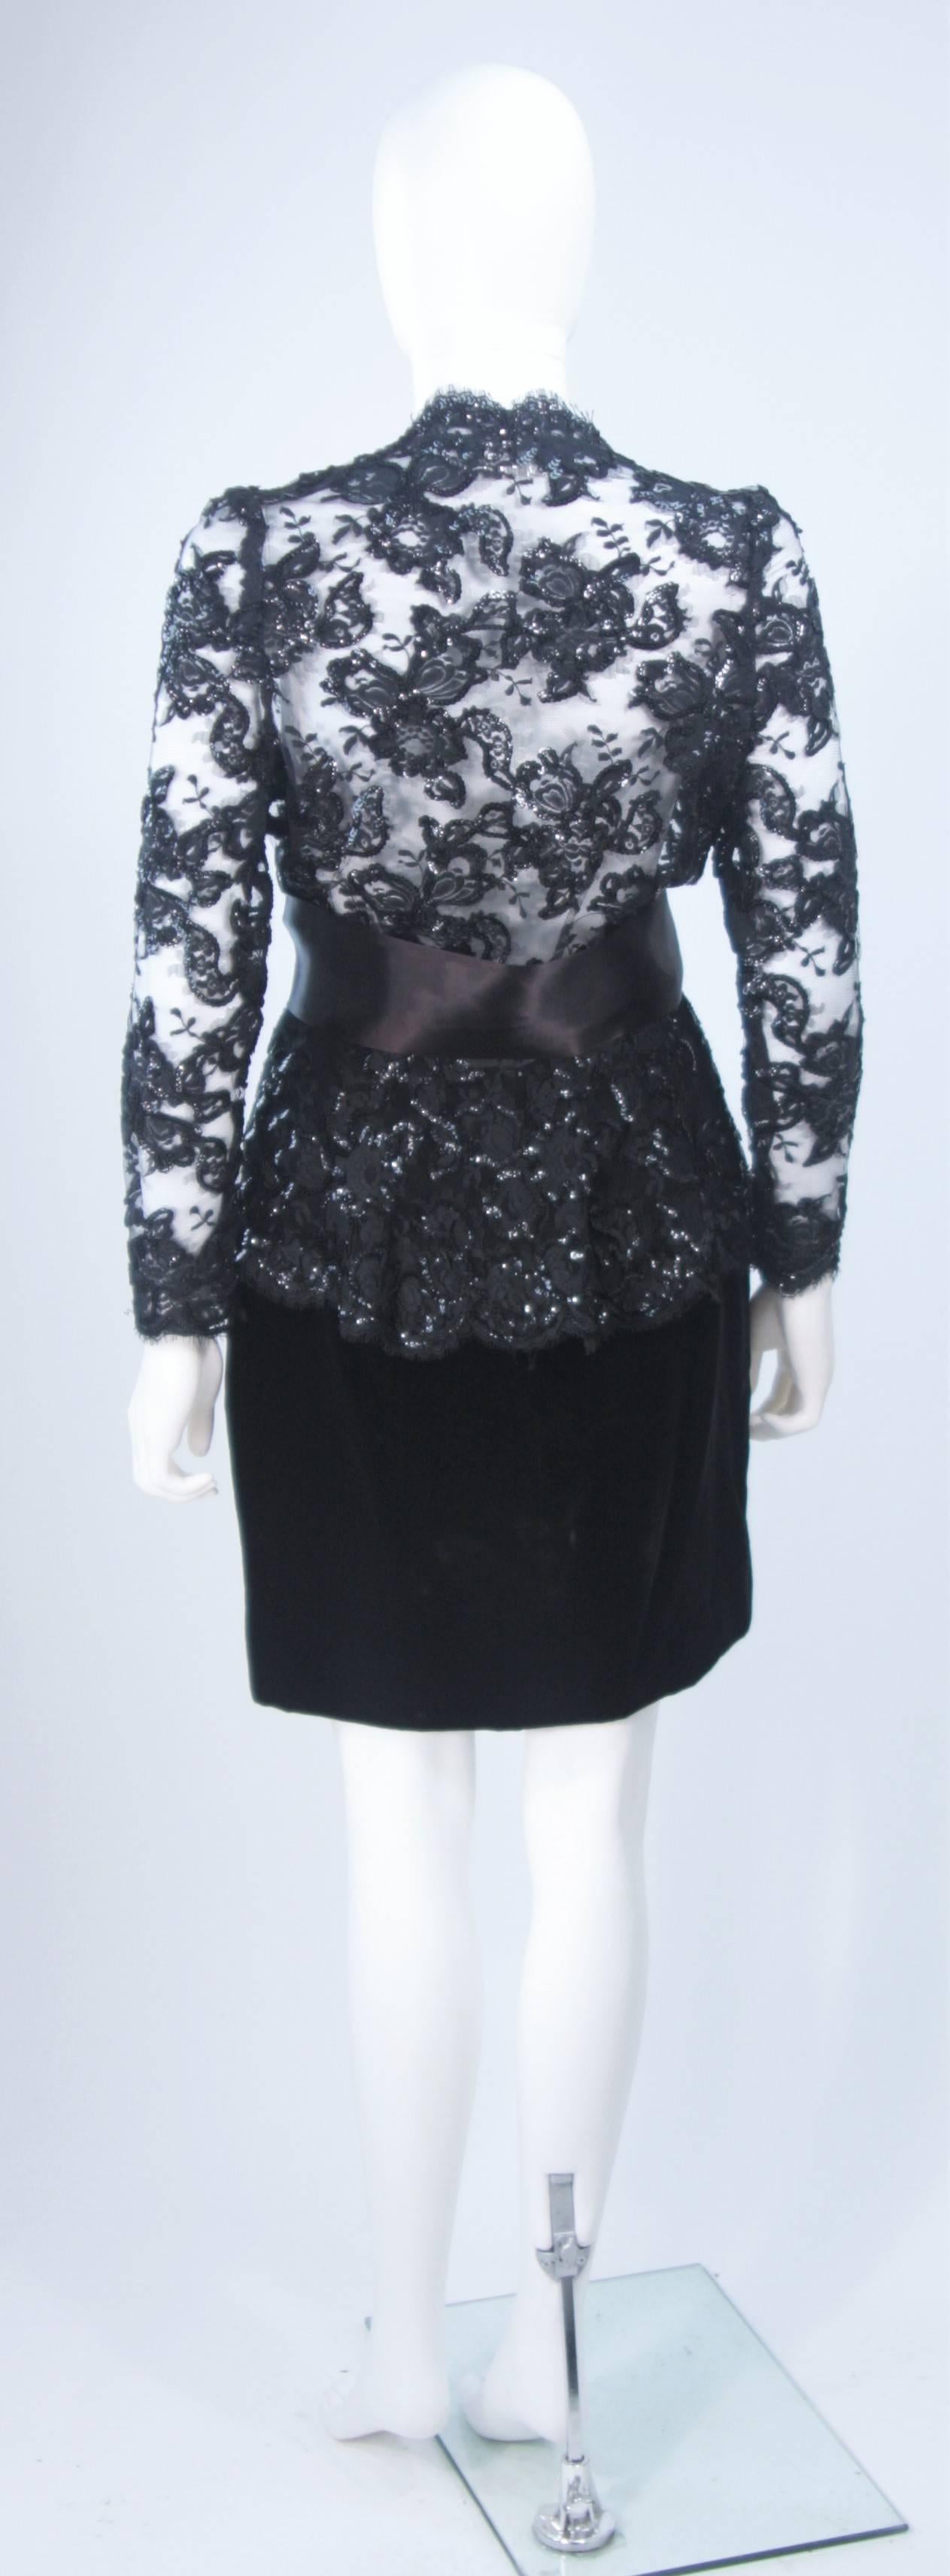 Women's TRAVILLA Black Sequin Lace Skirt Suit with Satin Bow Belt Size 2-4 For Sale